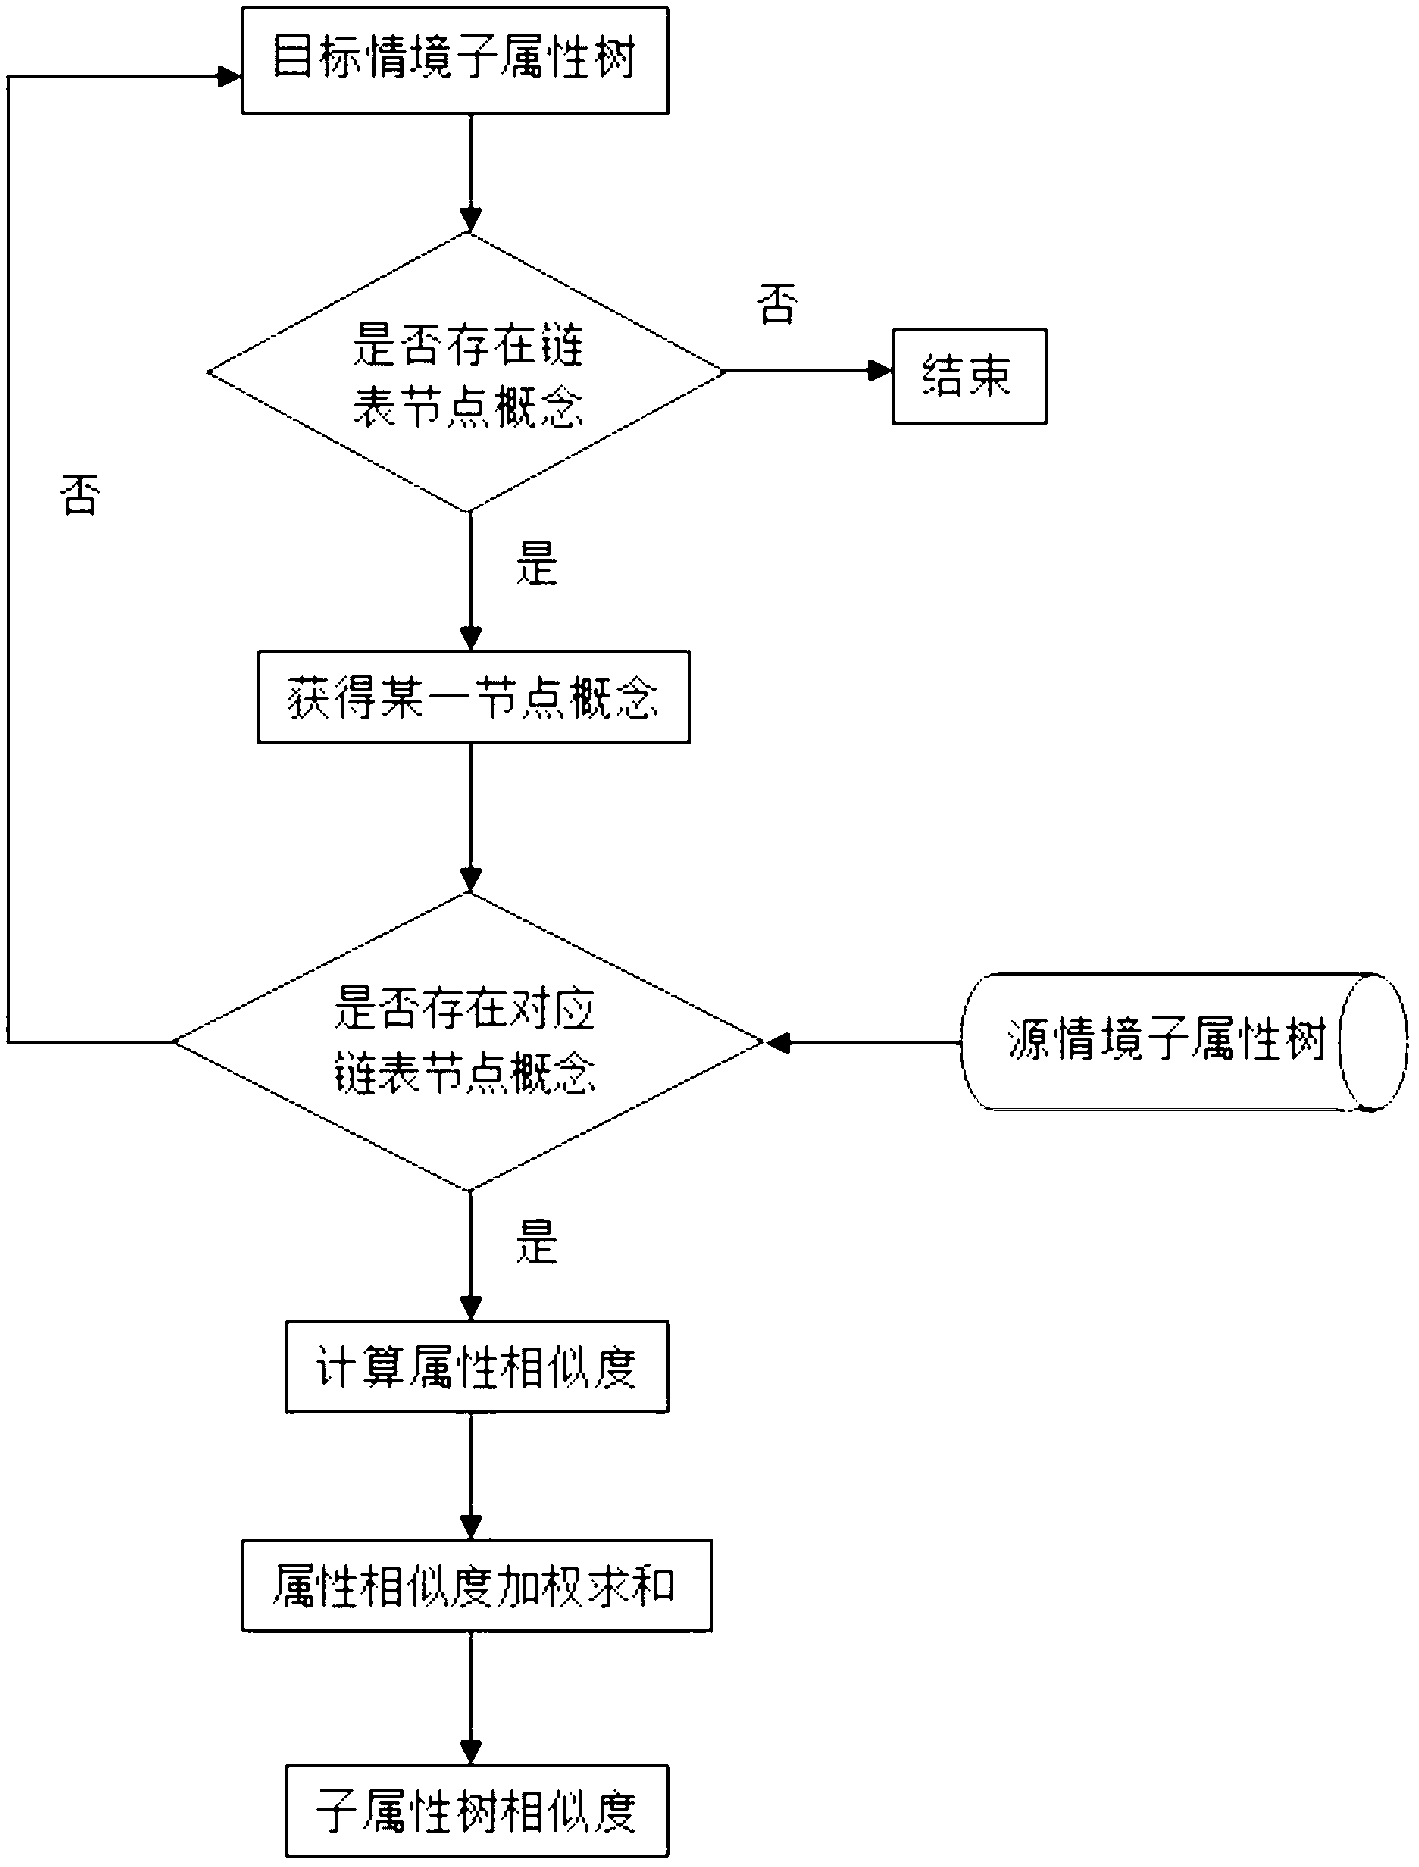 Method of network community user push-service based on user situation body